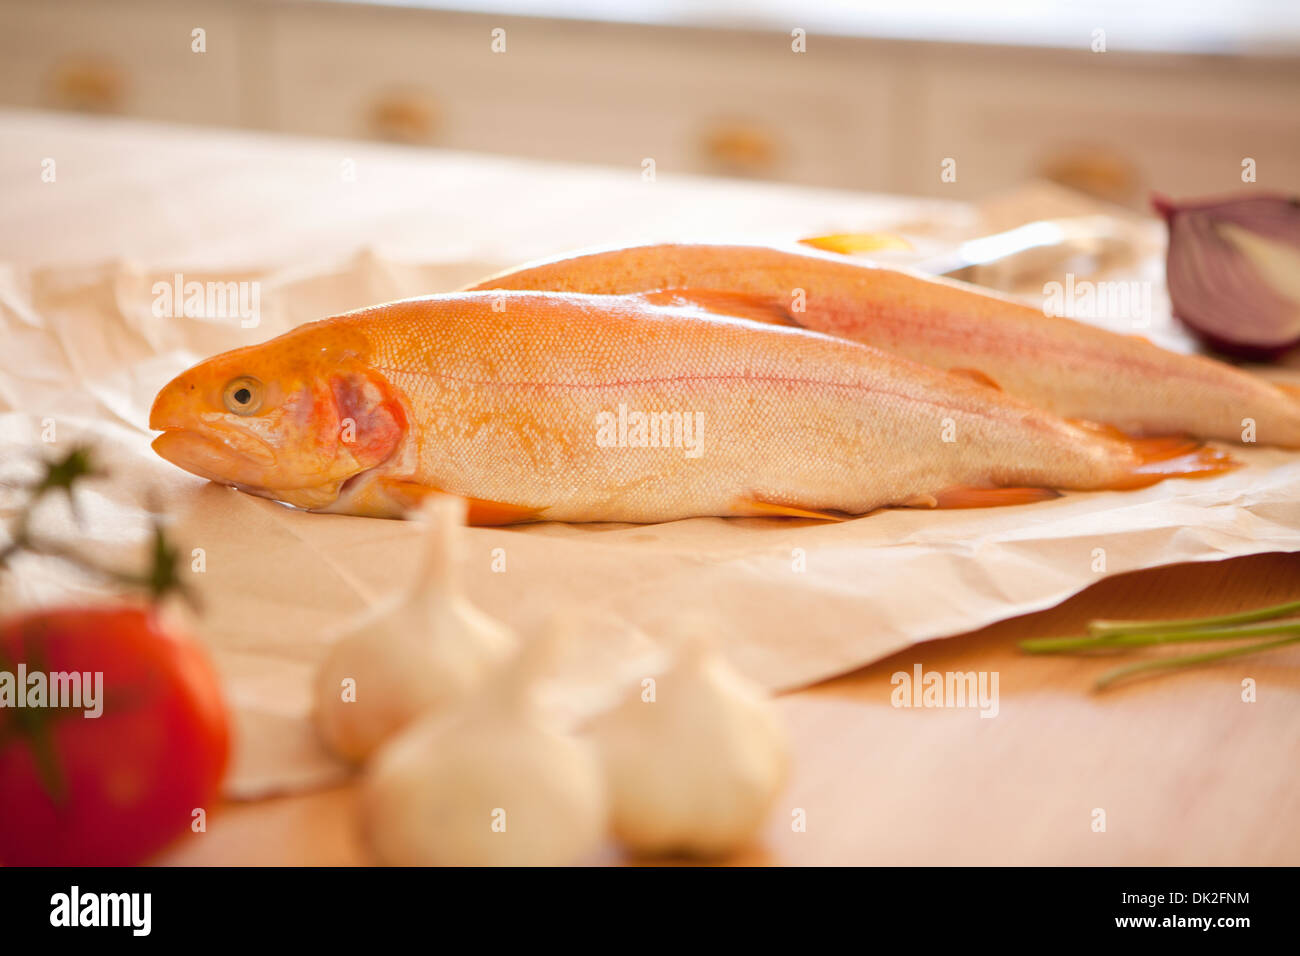 Close up of whole fish, garlic and tomato ingredients on kitchen counter Stock Photo